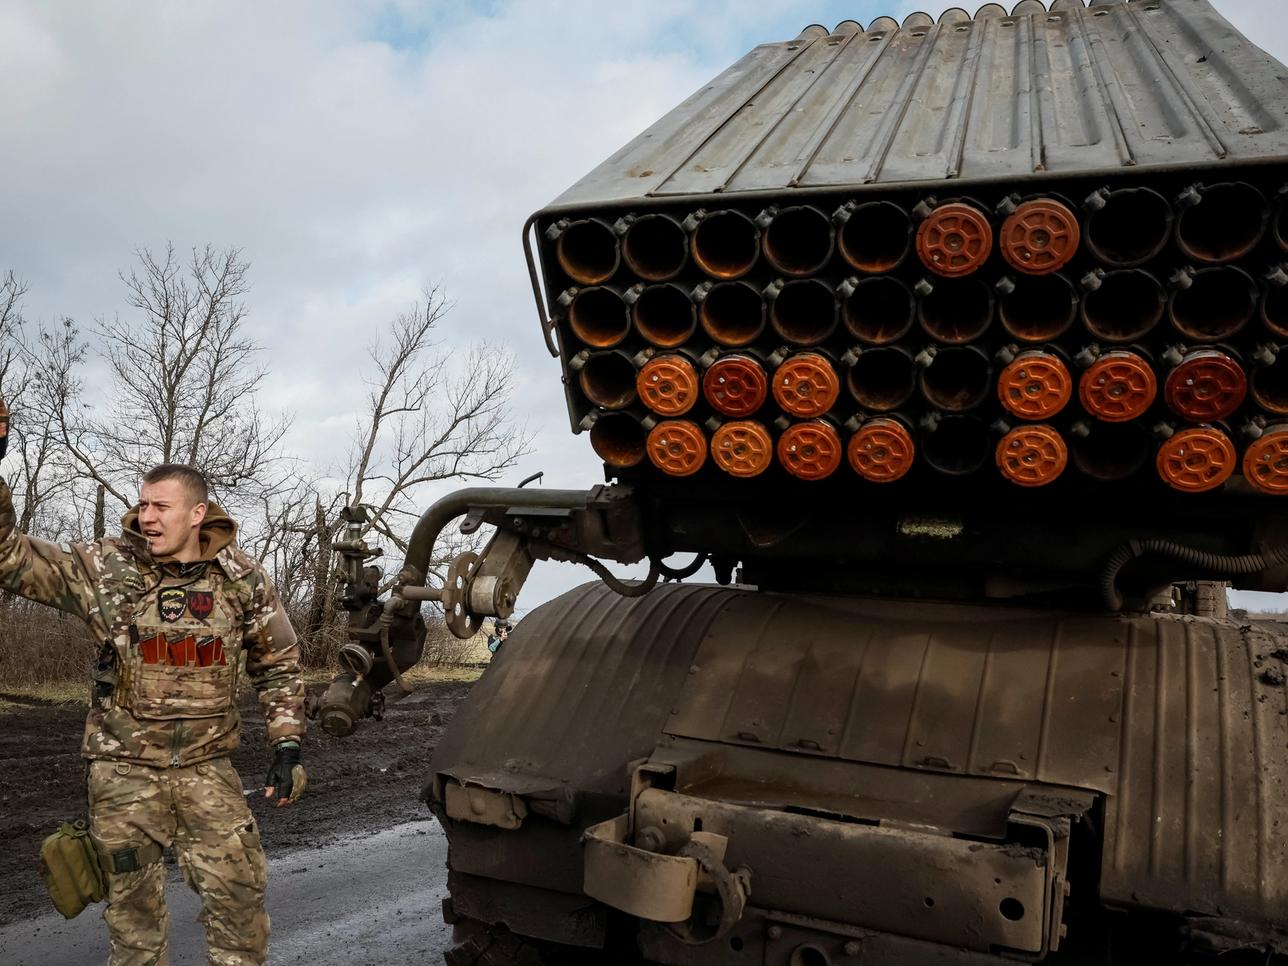 A Ukrainian soldier prepares to fire a BM-21 Grad multiple launch rocket system towards Russian troops near a frontline, amid Russia's attack on Ukraine in the Donetsk region on Feb. 4..